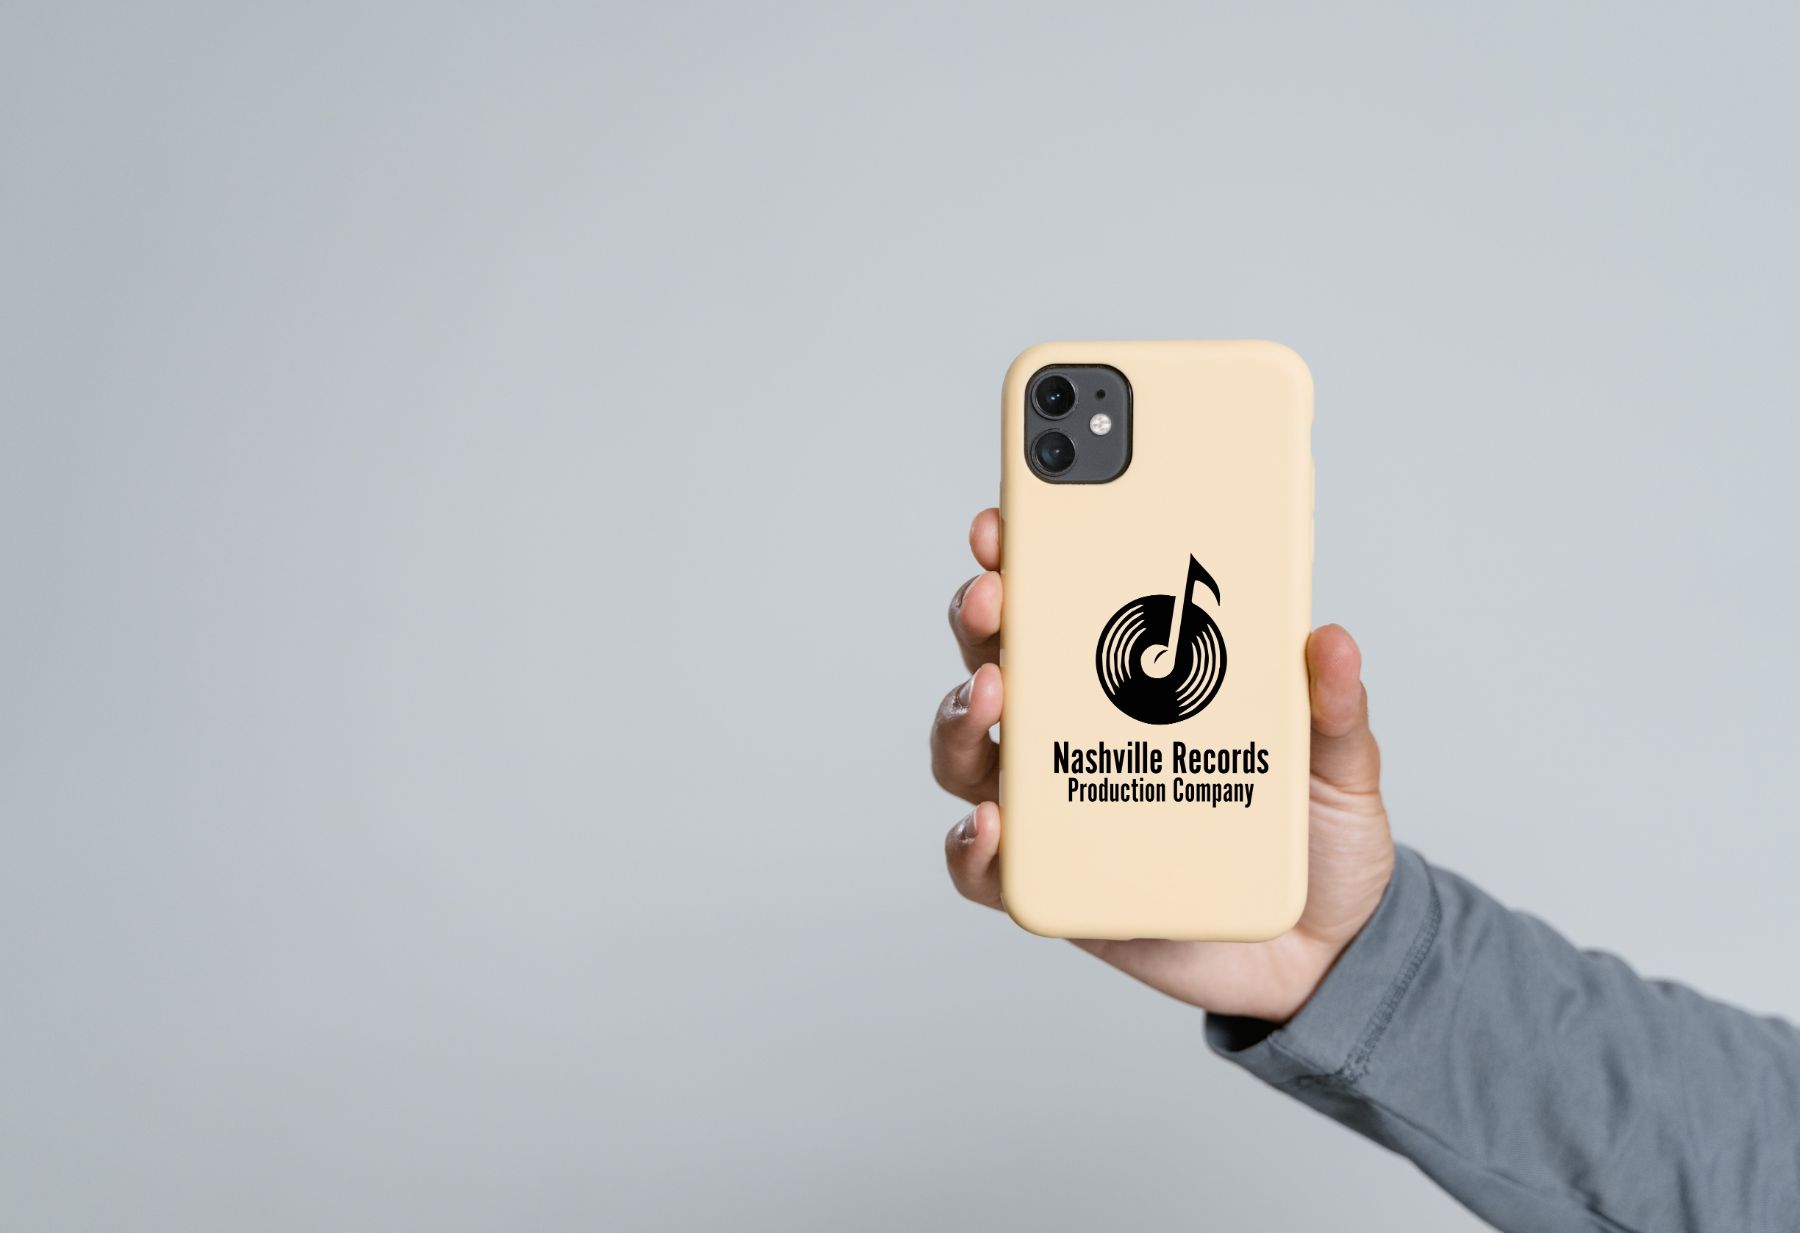 customized phone case printed with Nashville Records Production Company logo